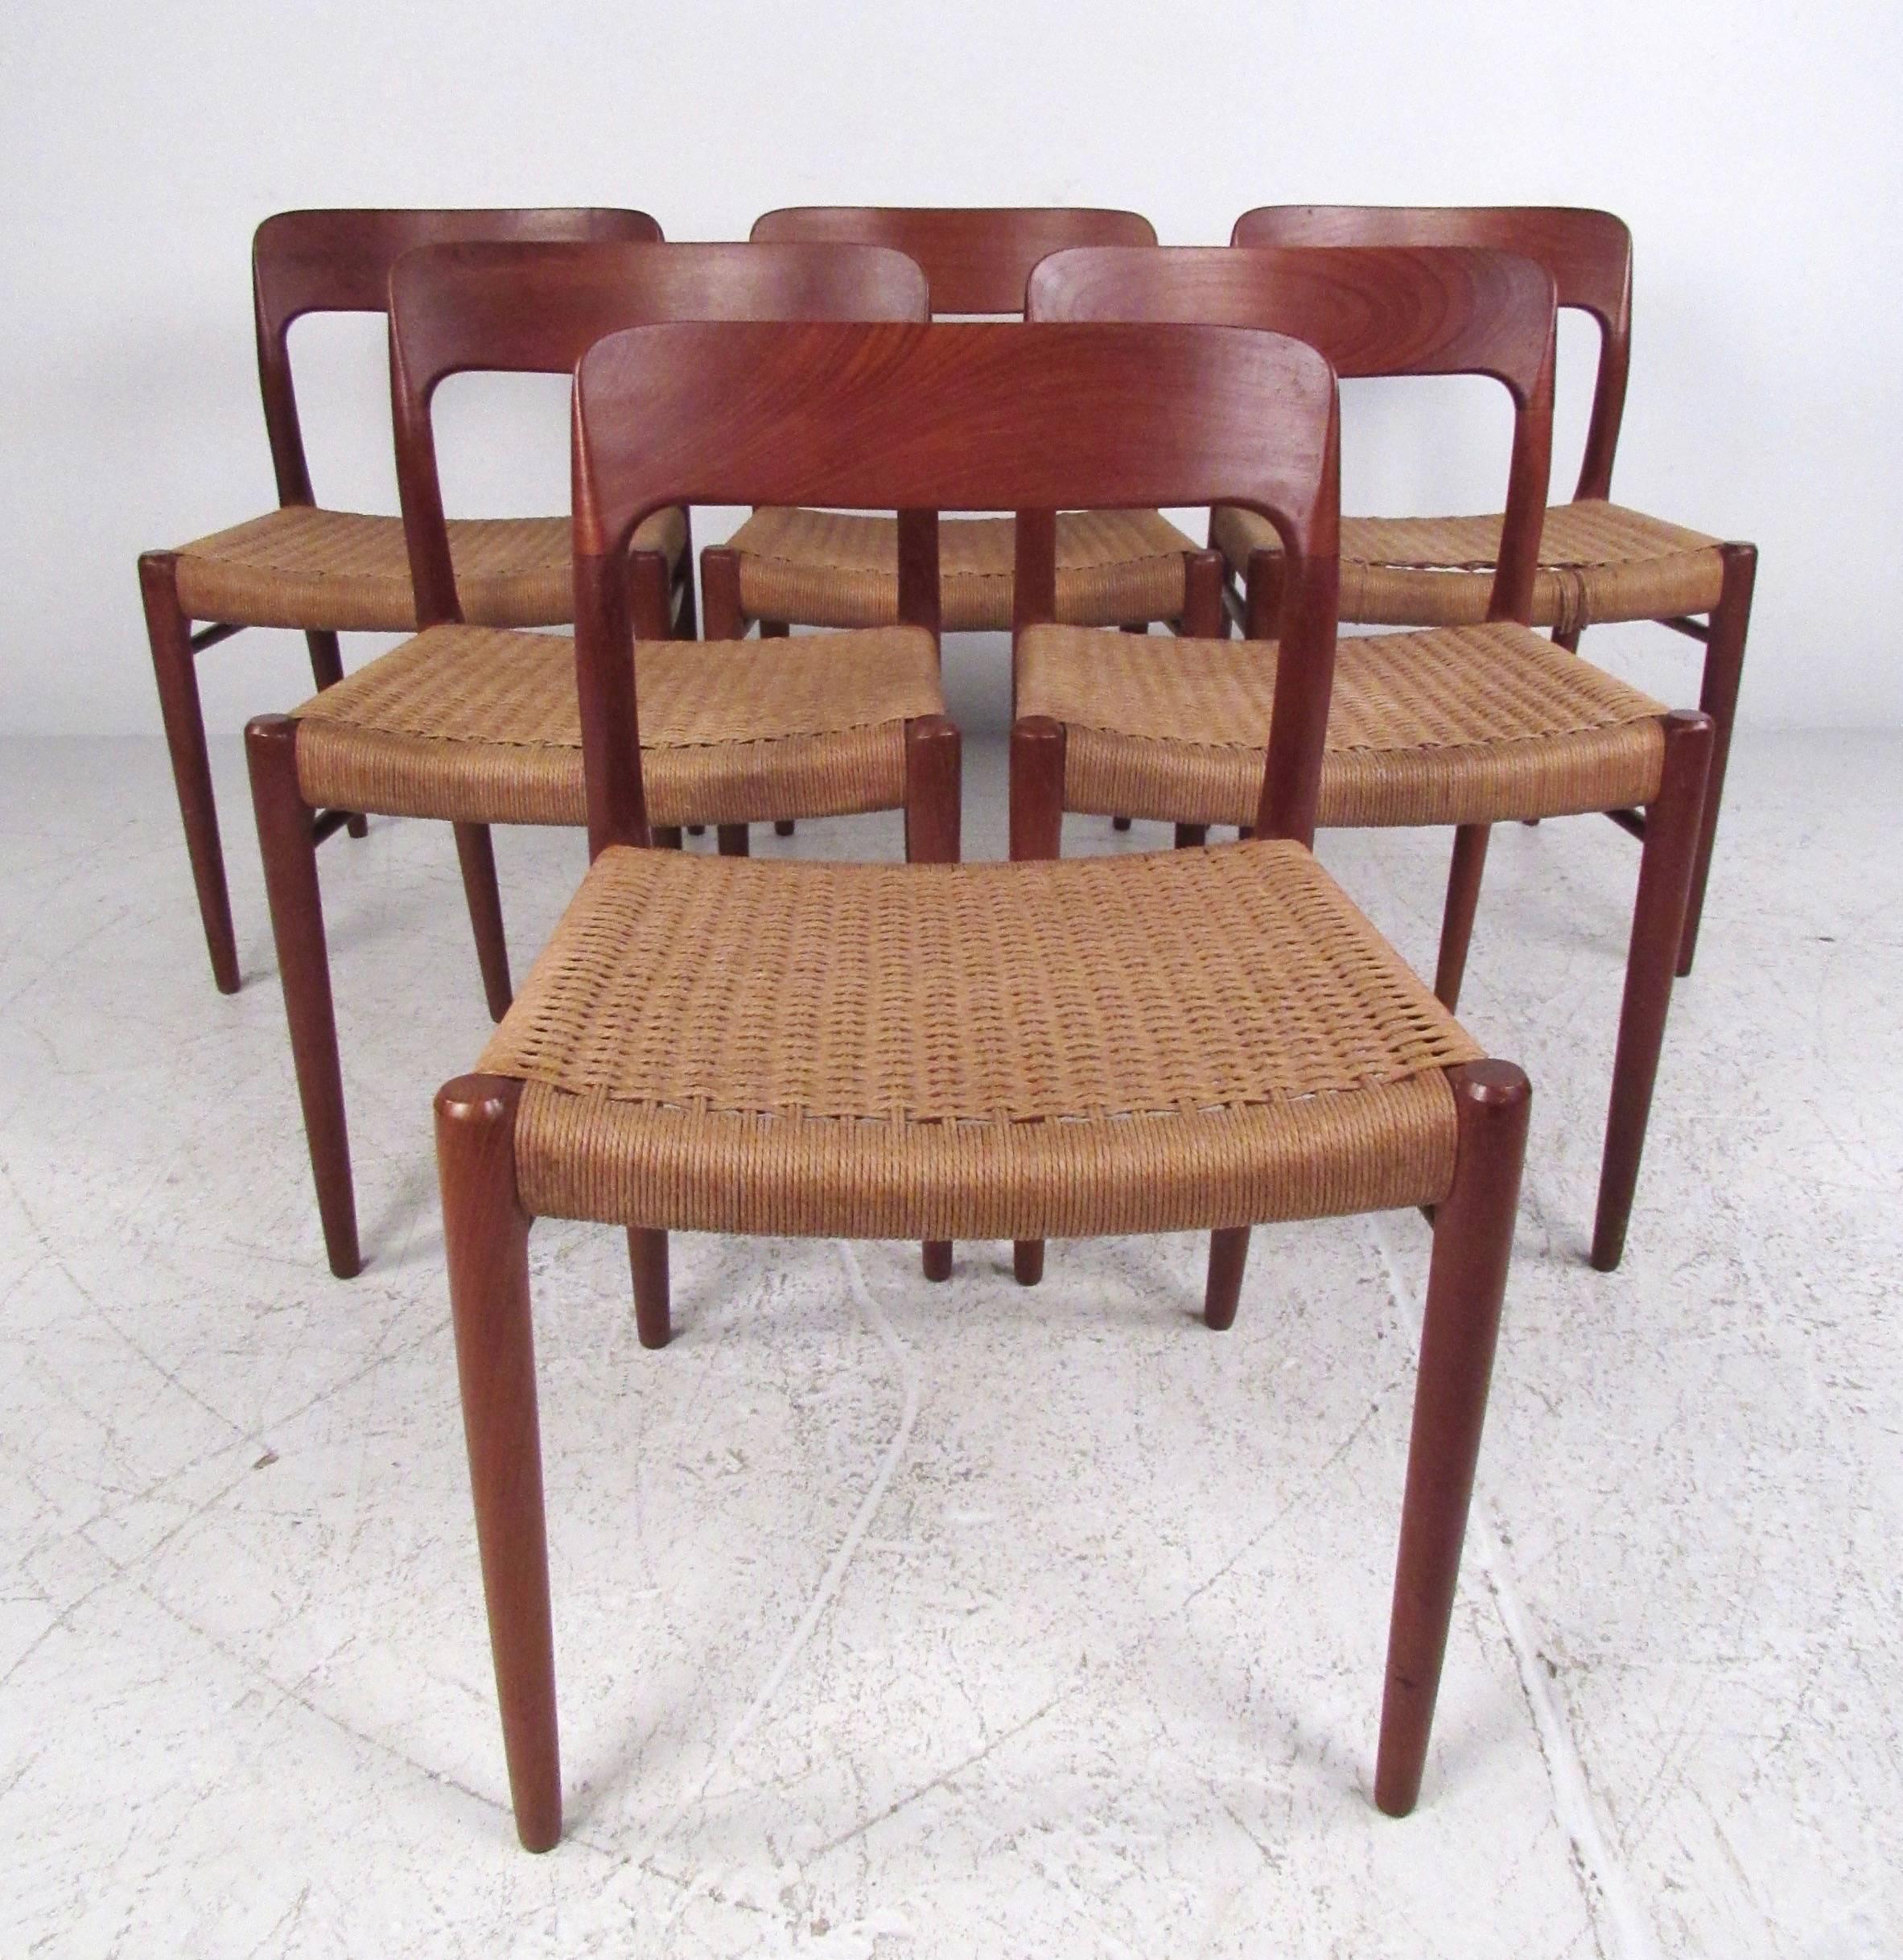 This Mid-Century teak dining set features six stylish Niels Otto Møller dining chairs paired with an unmarked circular dining table.  The comfortable sculpted teak chairs feature woven papercord seats with side stretchers for added stability. Please